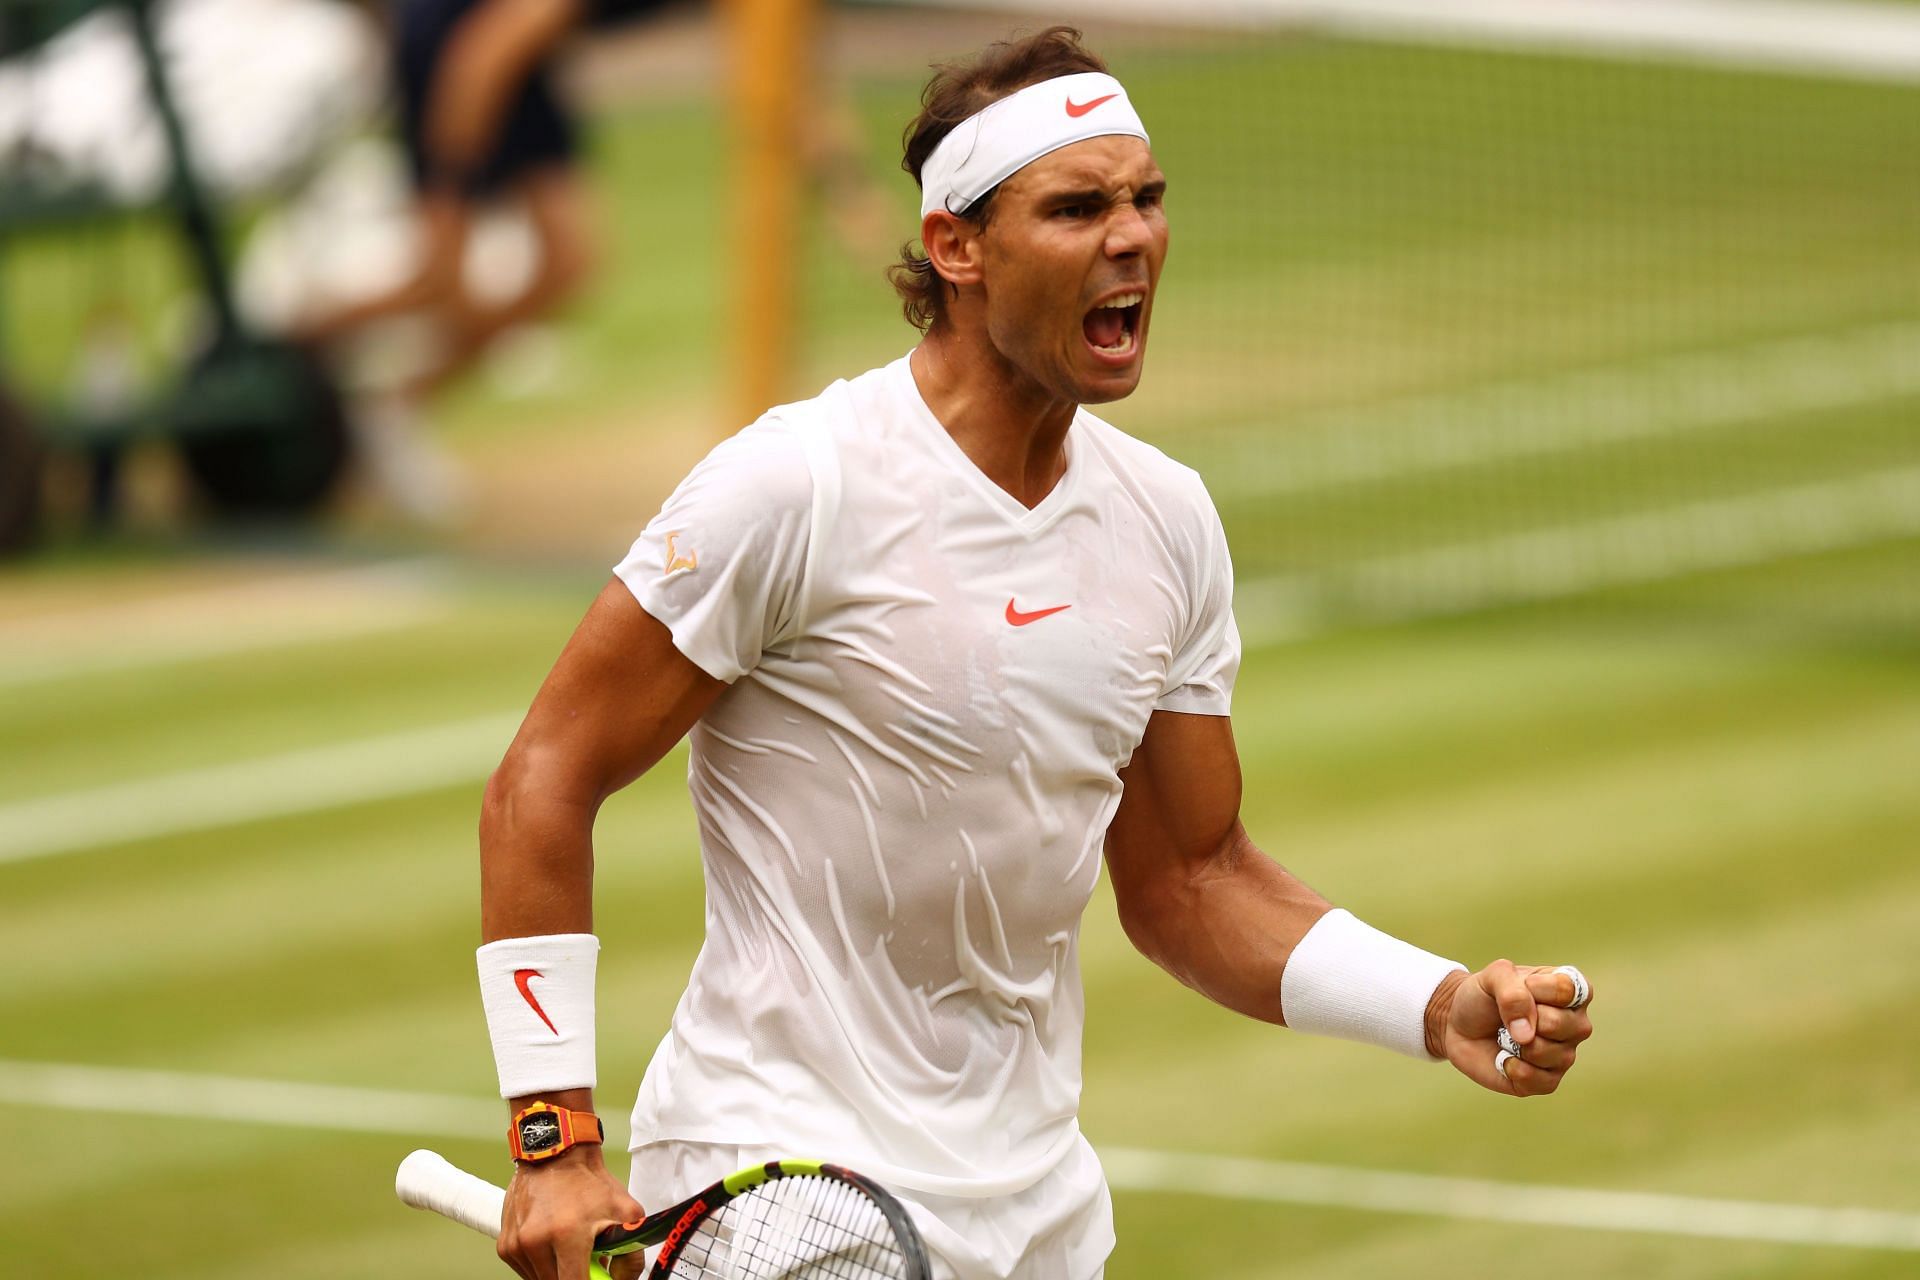 The two-time Wimbledon winner is gearing up for his first appearance at the tournament since 2019